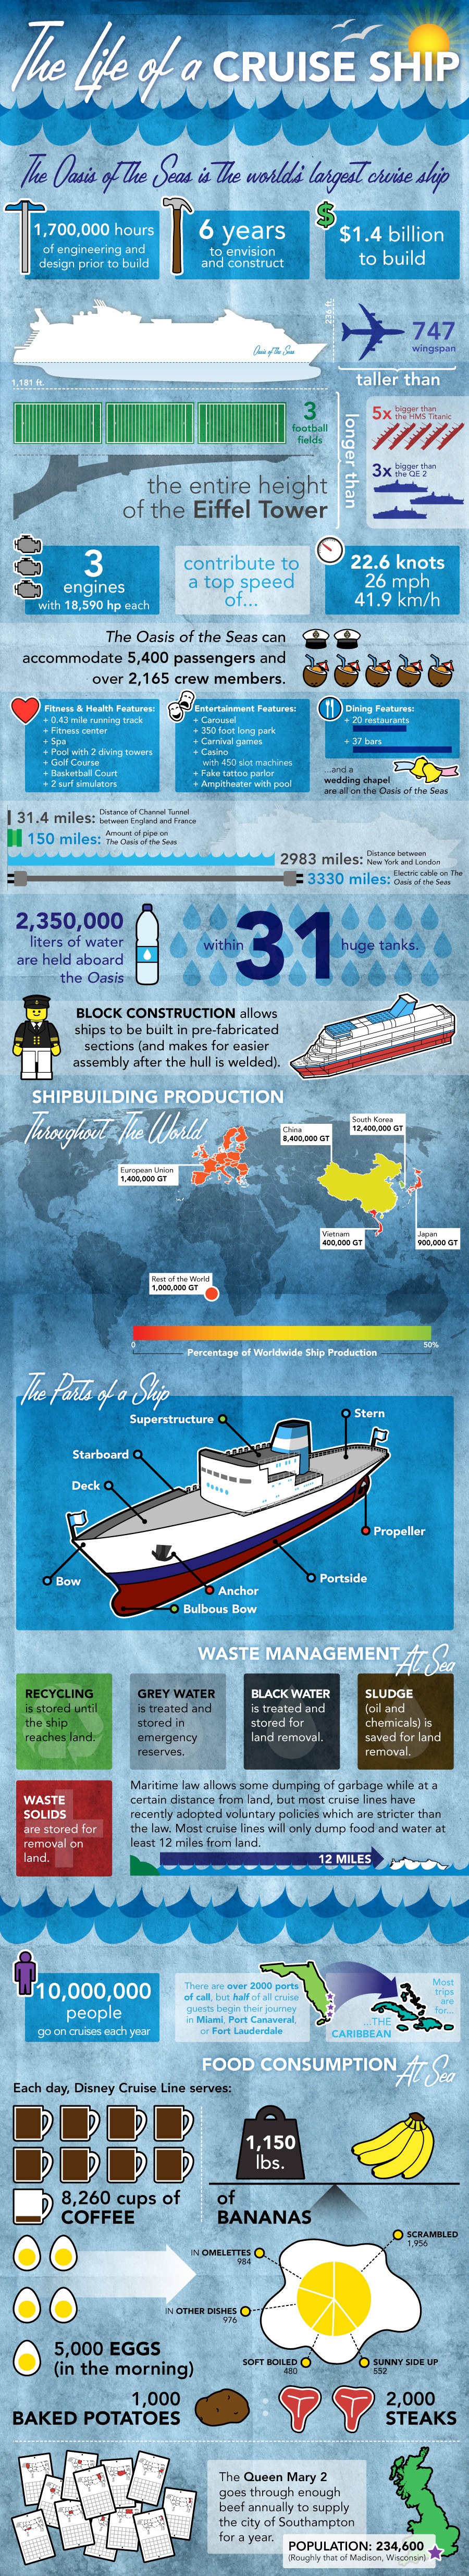 how-big-are-cruise-ships